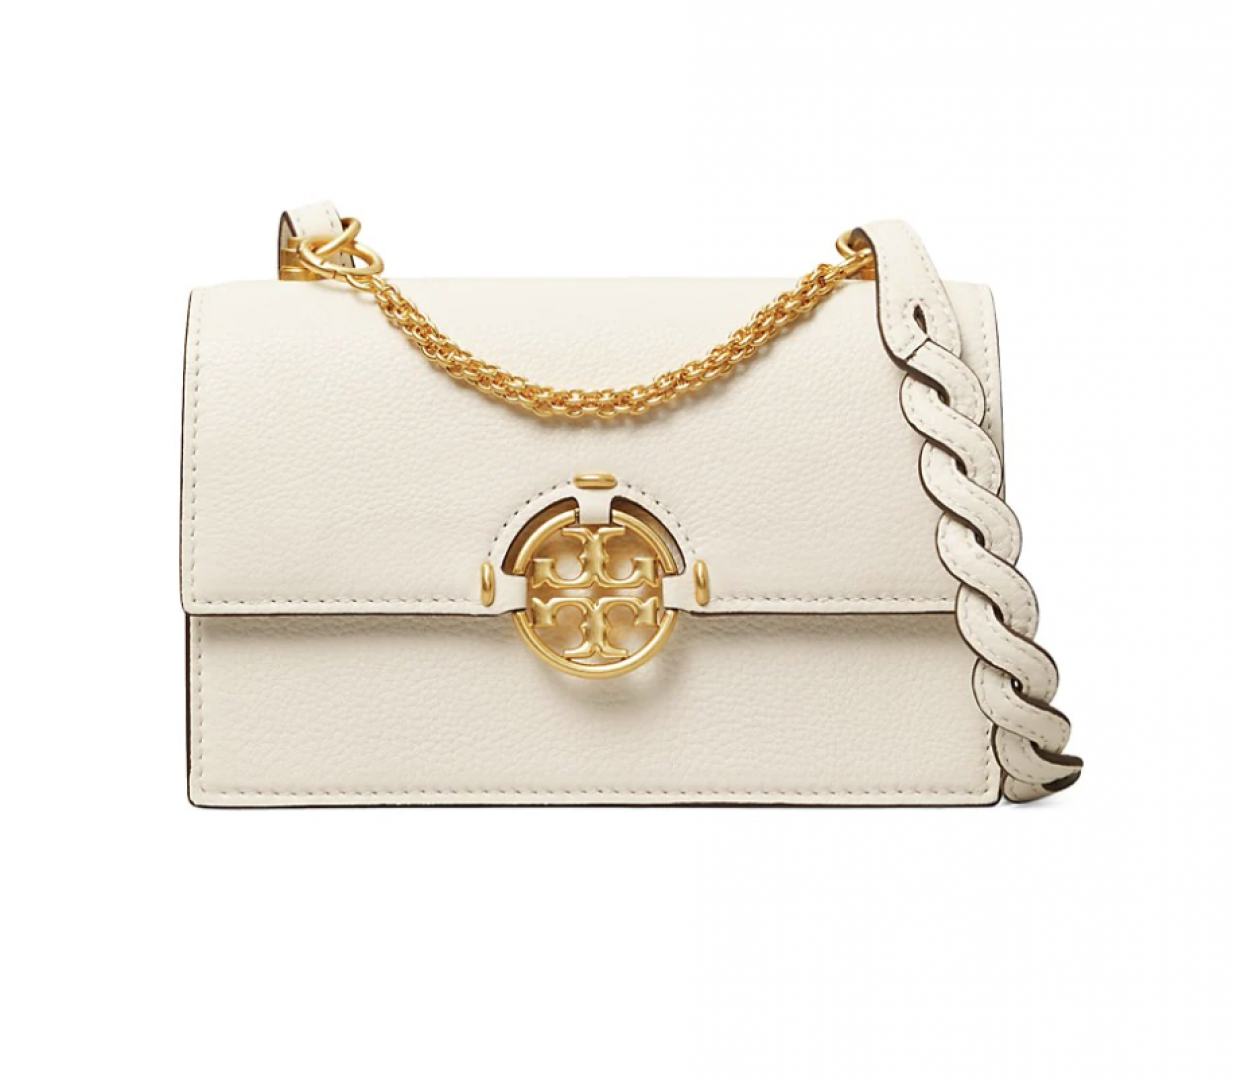 Shop 10 Mother's Day Gifts For The Mom Who Loves Designer Bags | Essence